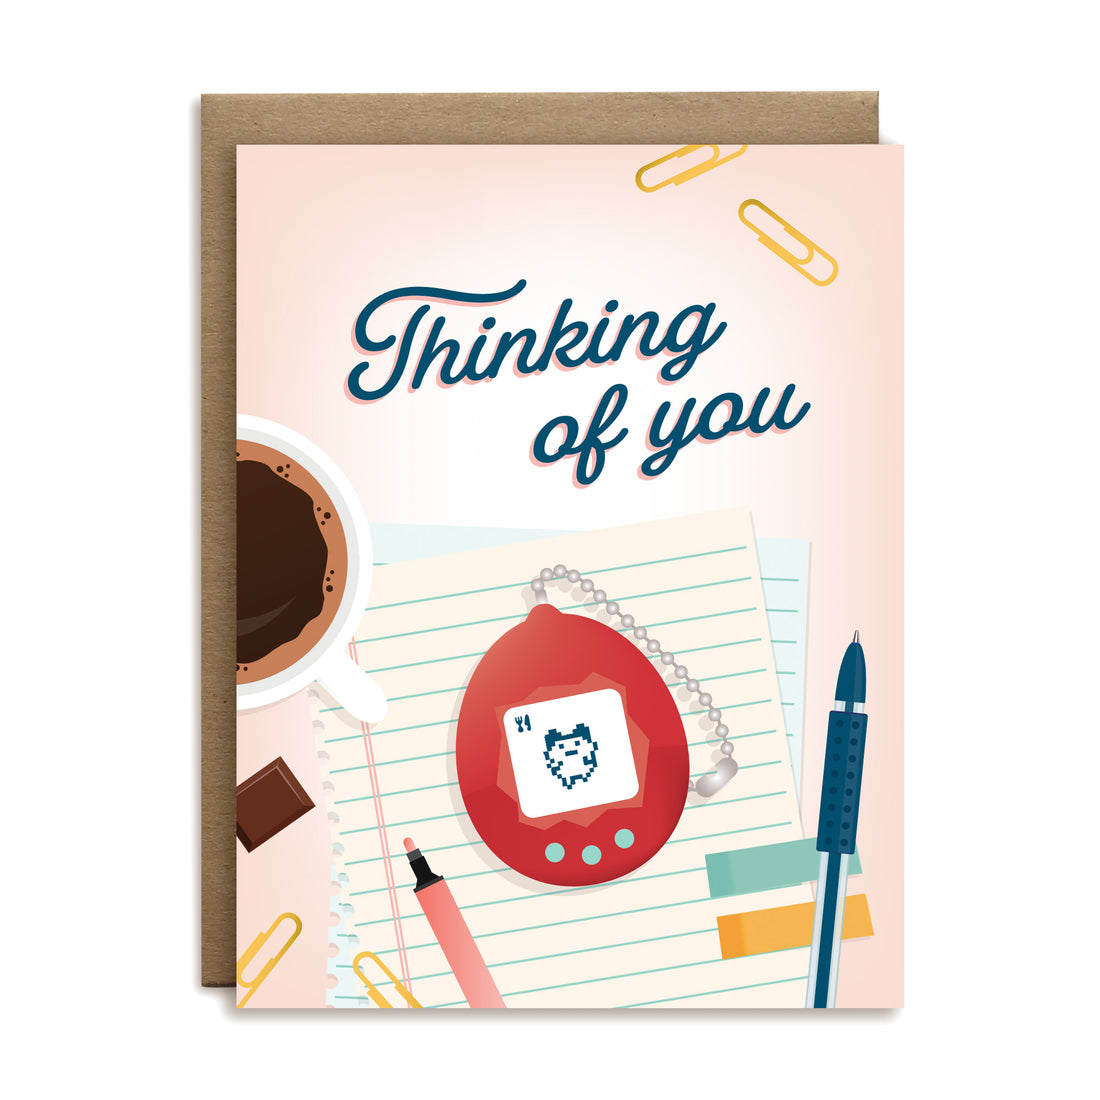 Thinking of you tamagotchi friendship greeting card by I&